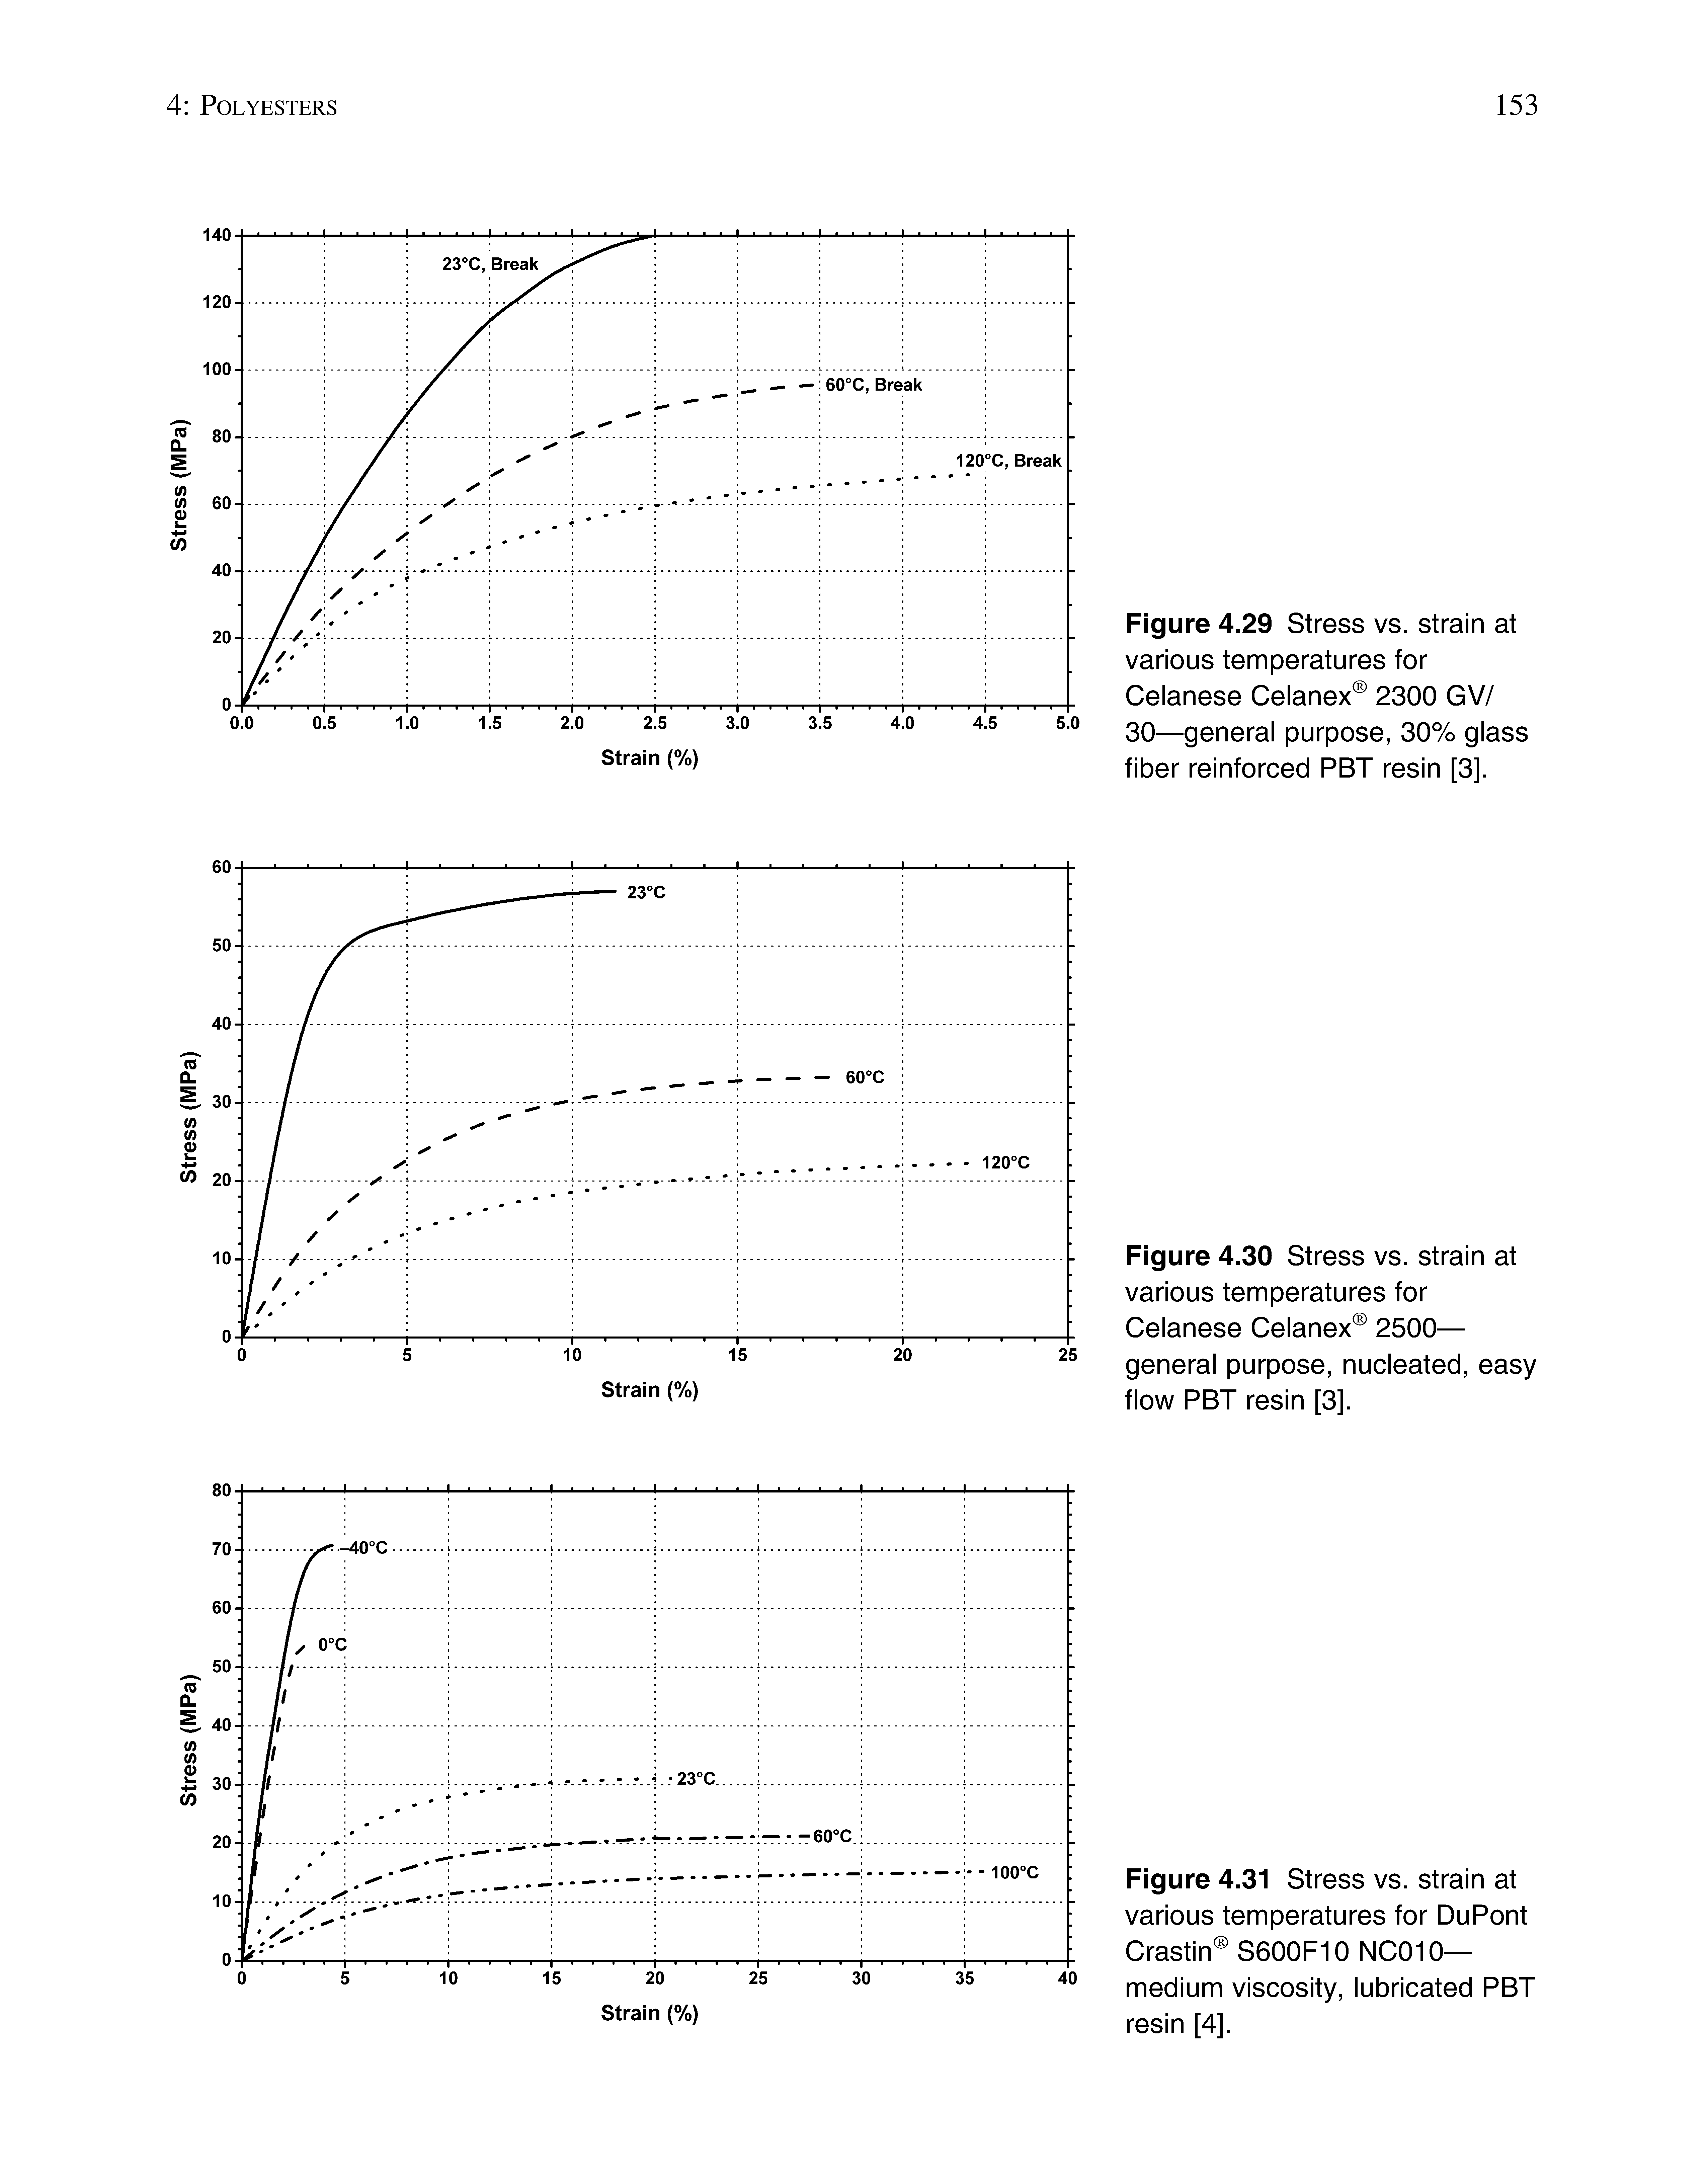 Figure 4.30 Stress vs. strain at various temperatures for Celanese Celanex 2500— general purpose, nucleated, easy flow PBT resin [3].